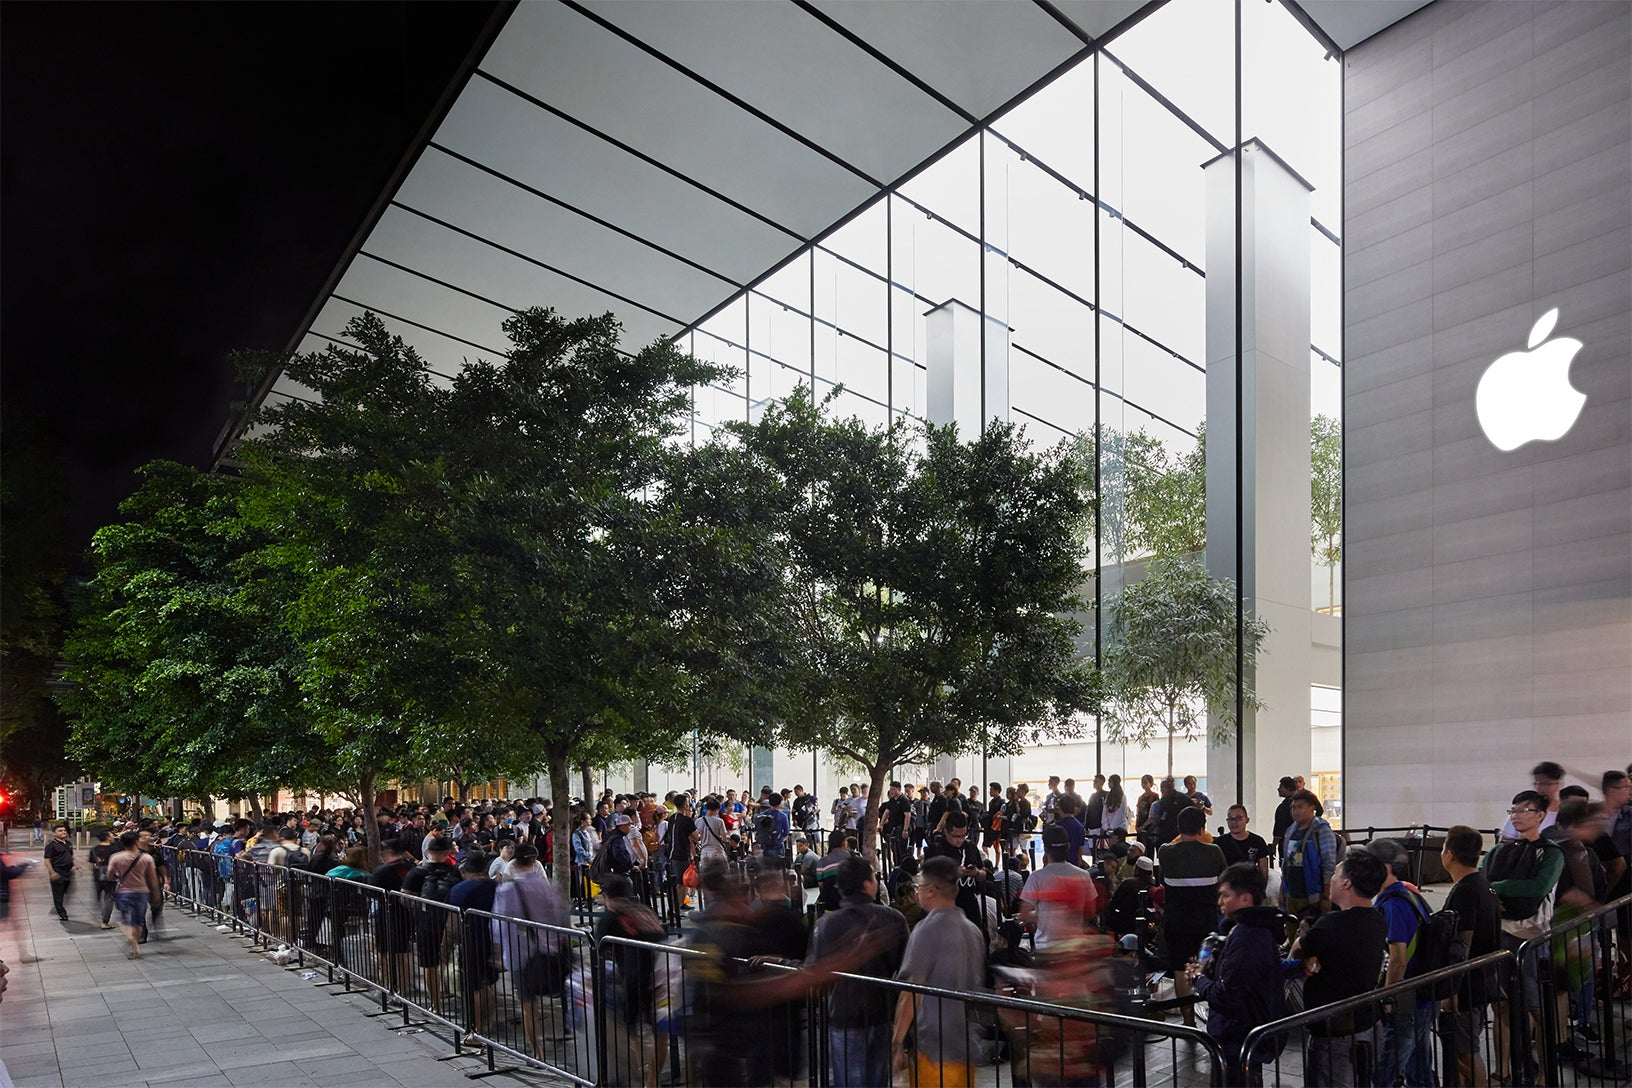 Apple fans waiting in line to buy the latest iPhone - Why do people hate Apple?